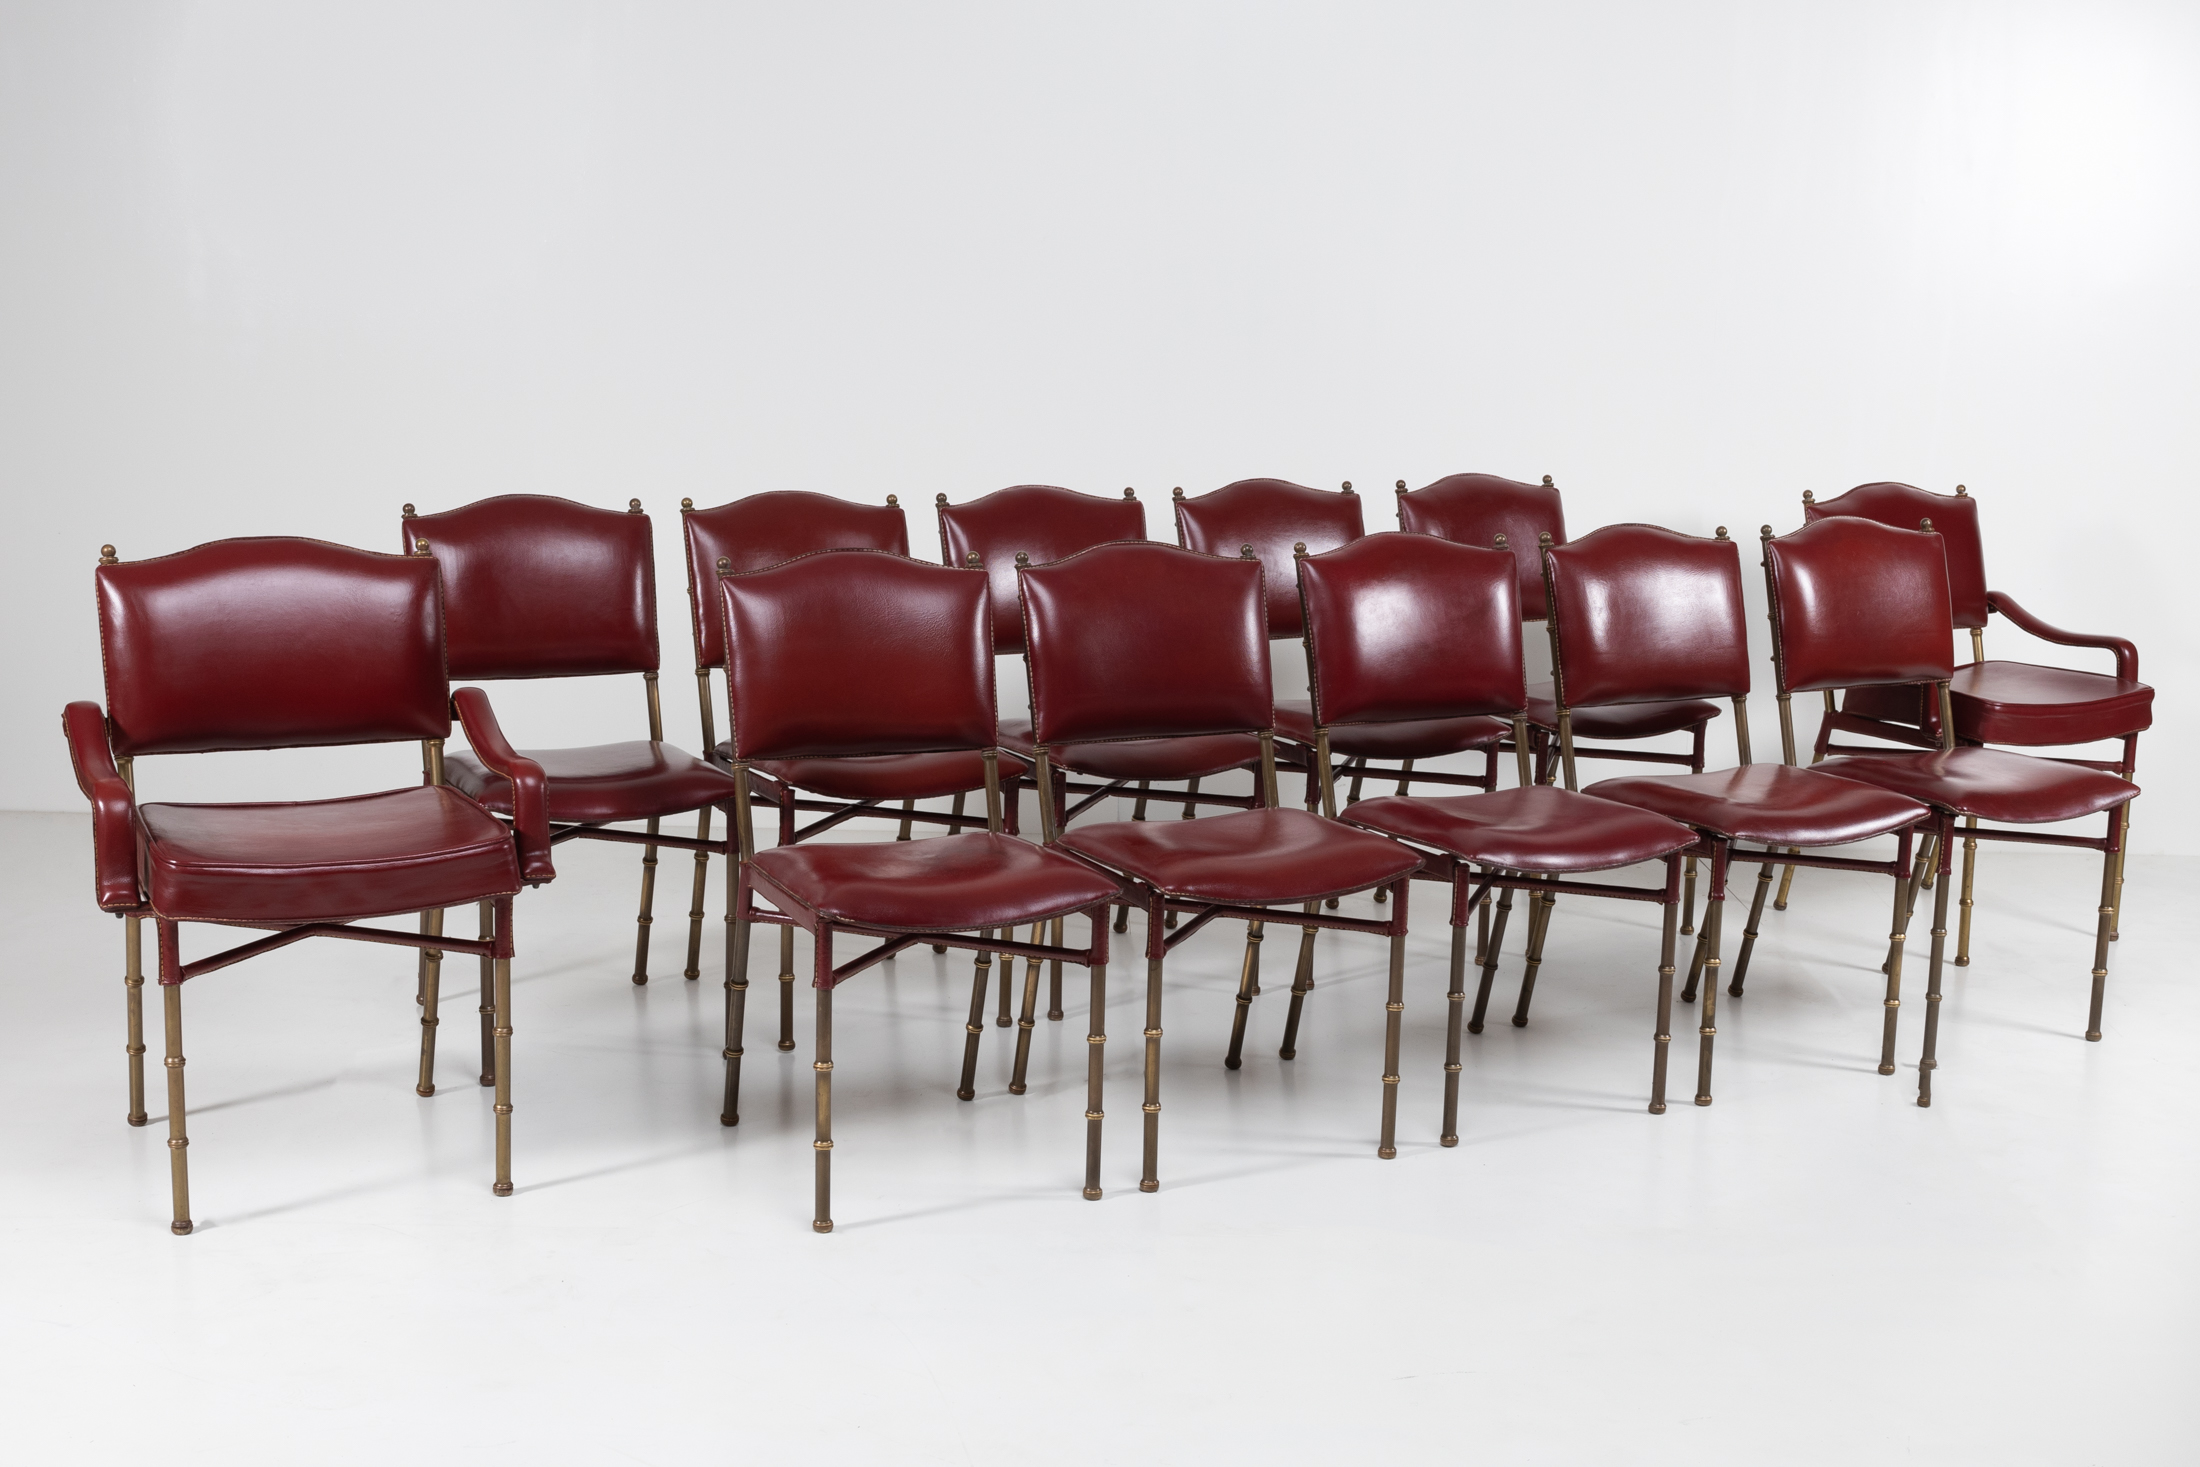 ZE15 Set armchairs and chairs saddle stitched red leather by Jacques Adnet -1